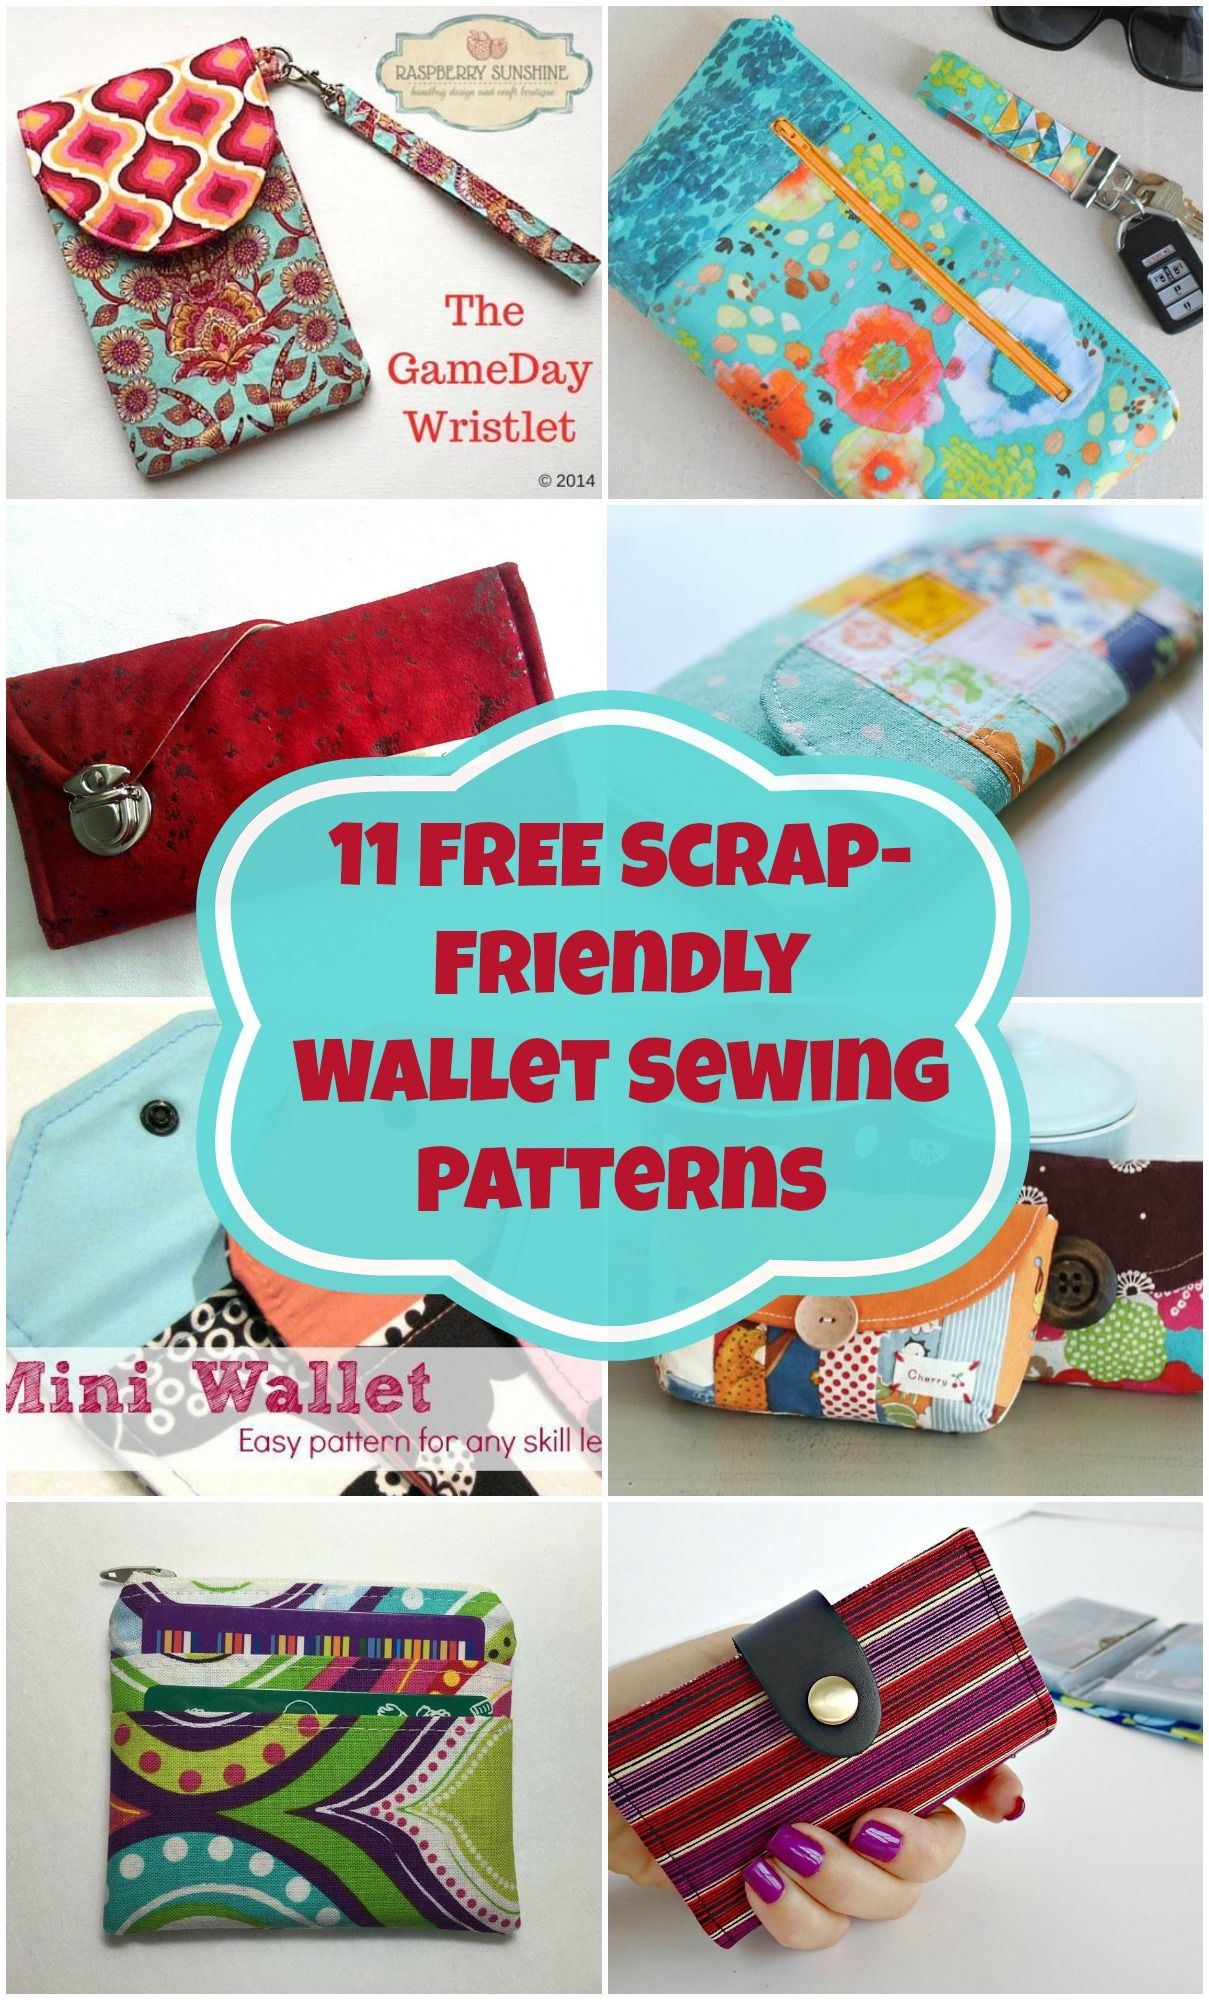 Sewing Wallet Pattern Free 11 Free Wallet Sewing Patterns All Scrap Friendly Easy To Sew With